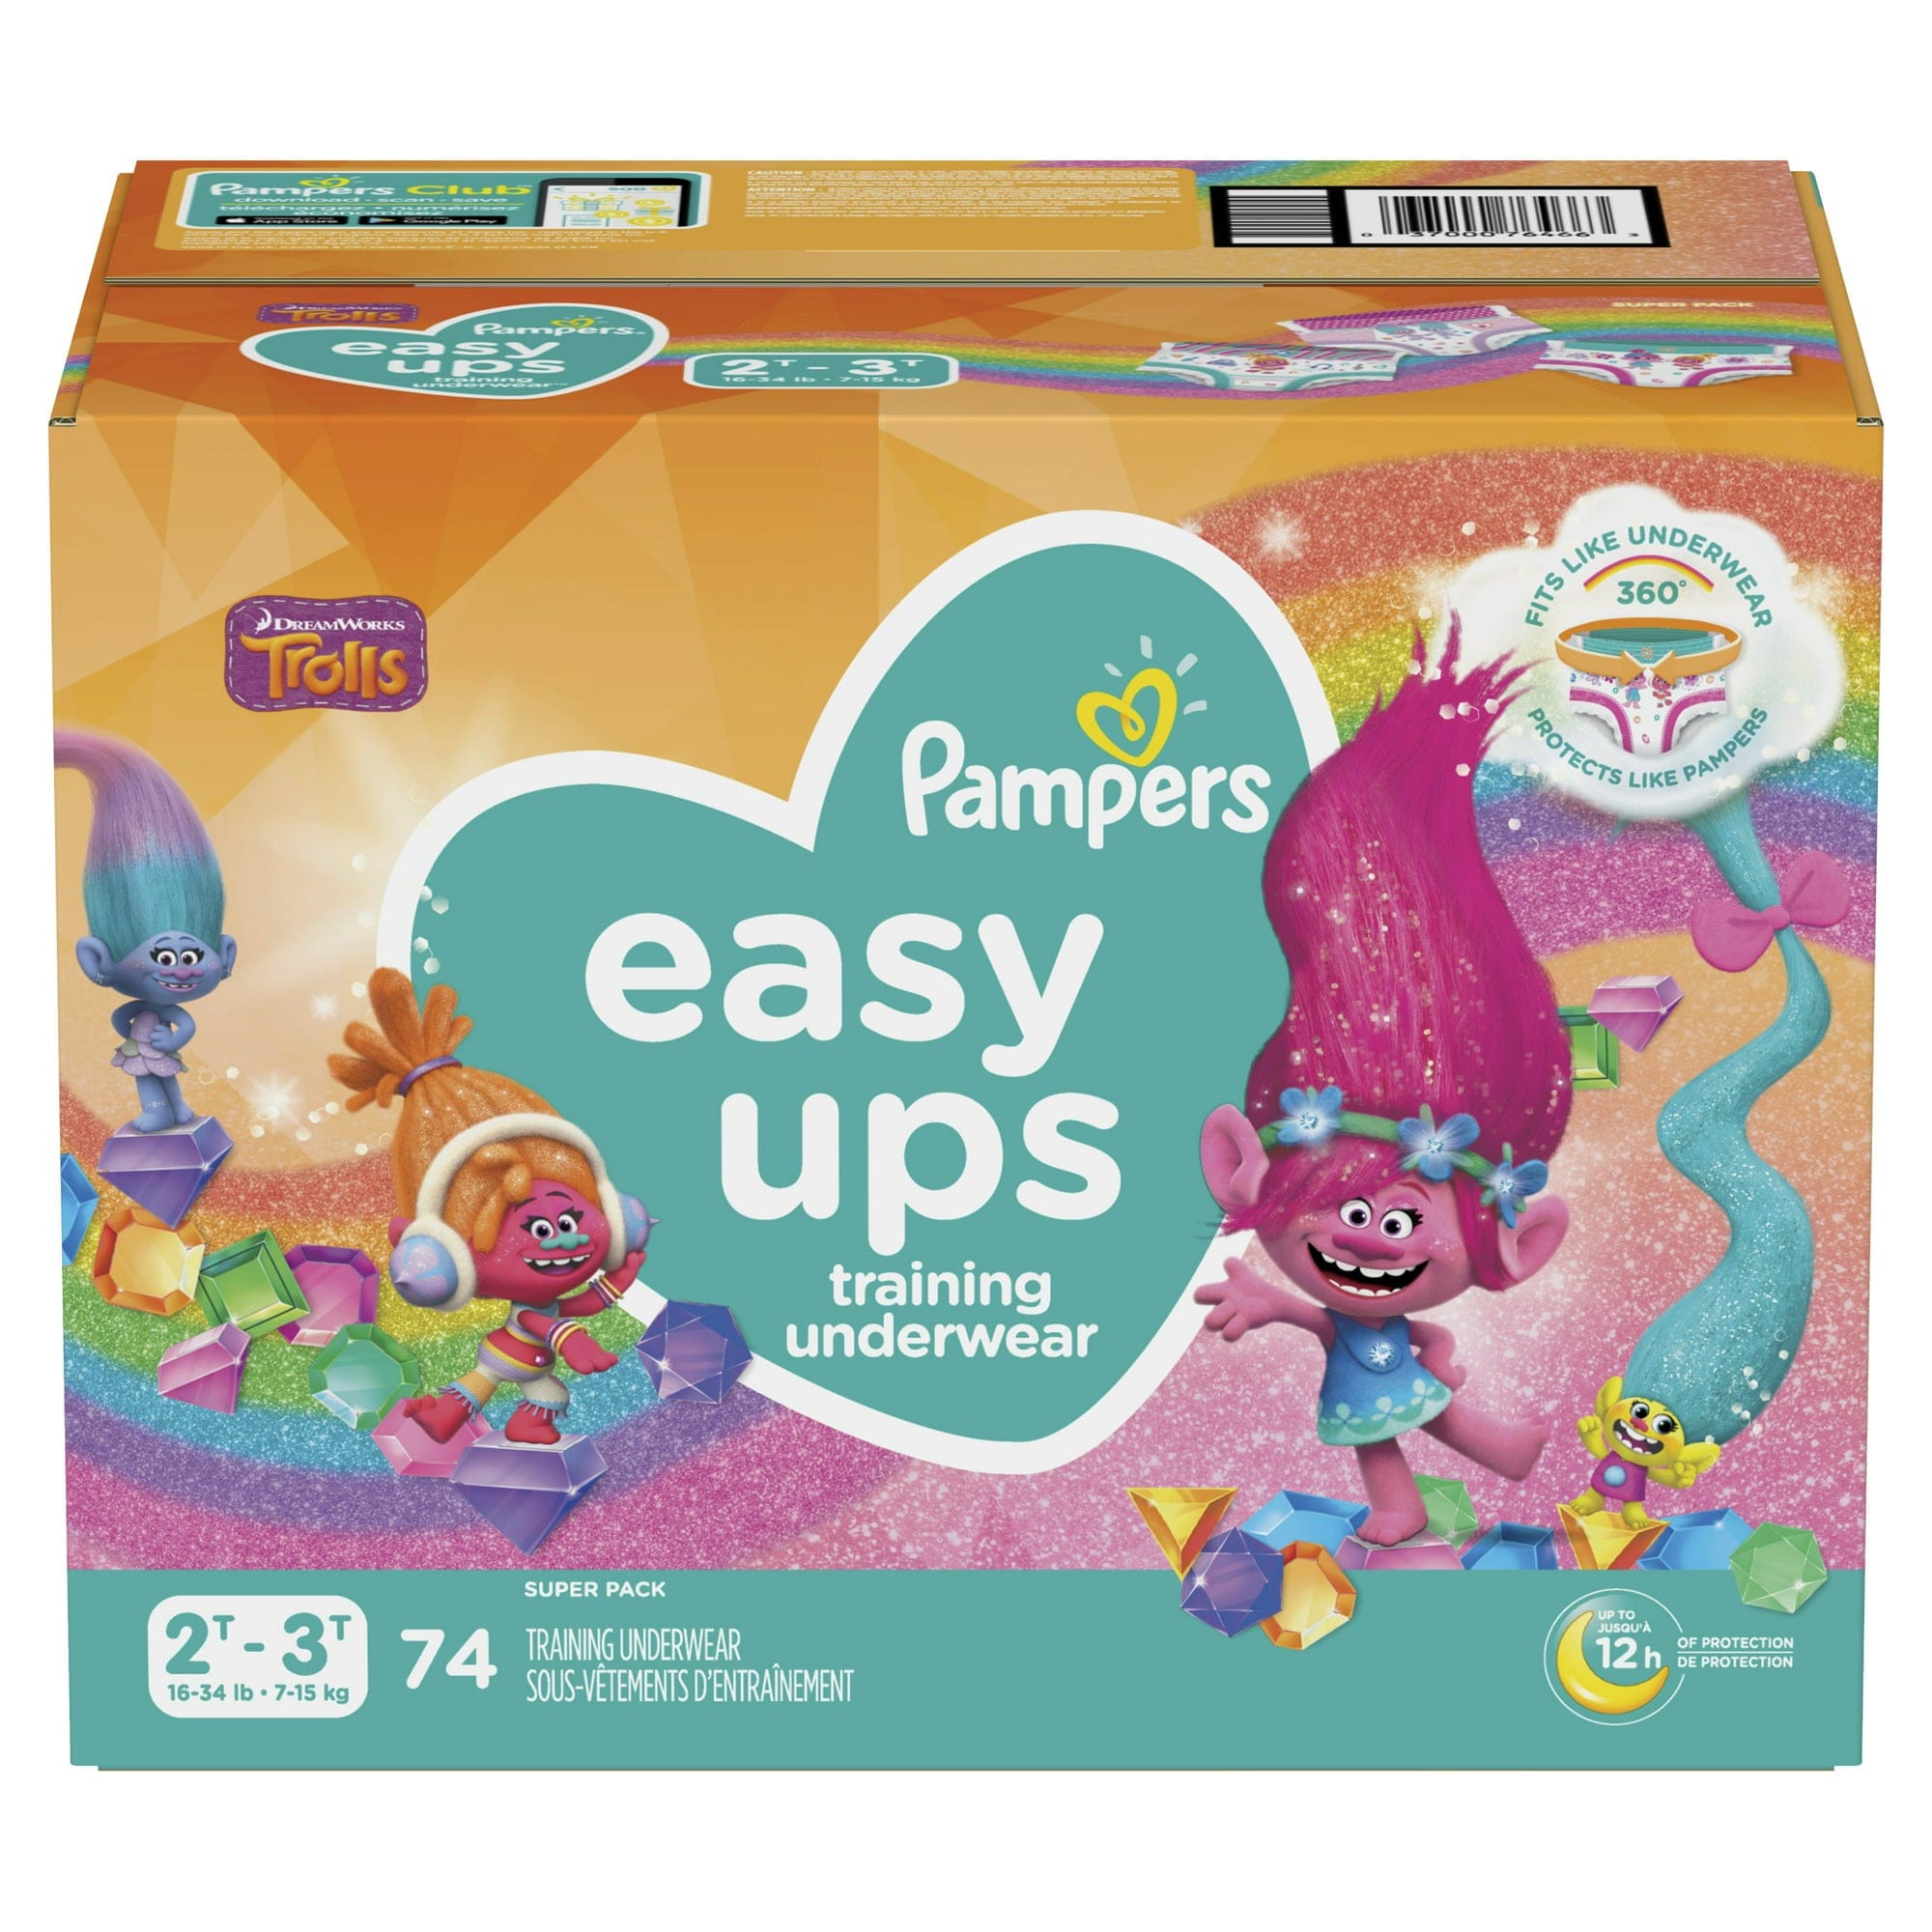 Pampers Easy Ups Training Underwear - 2T/3T - 74ct - Boys